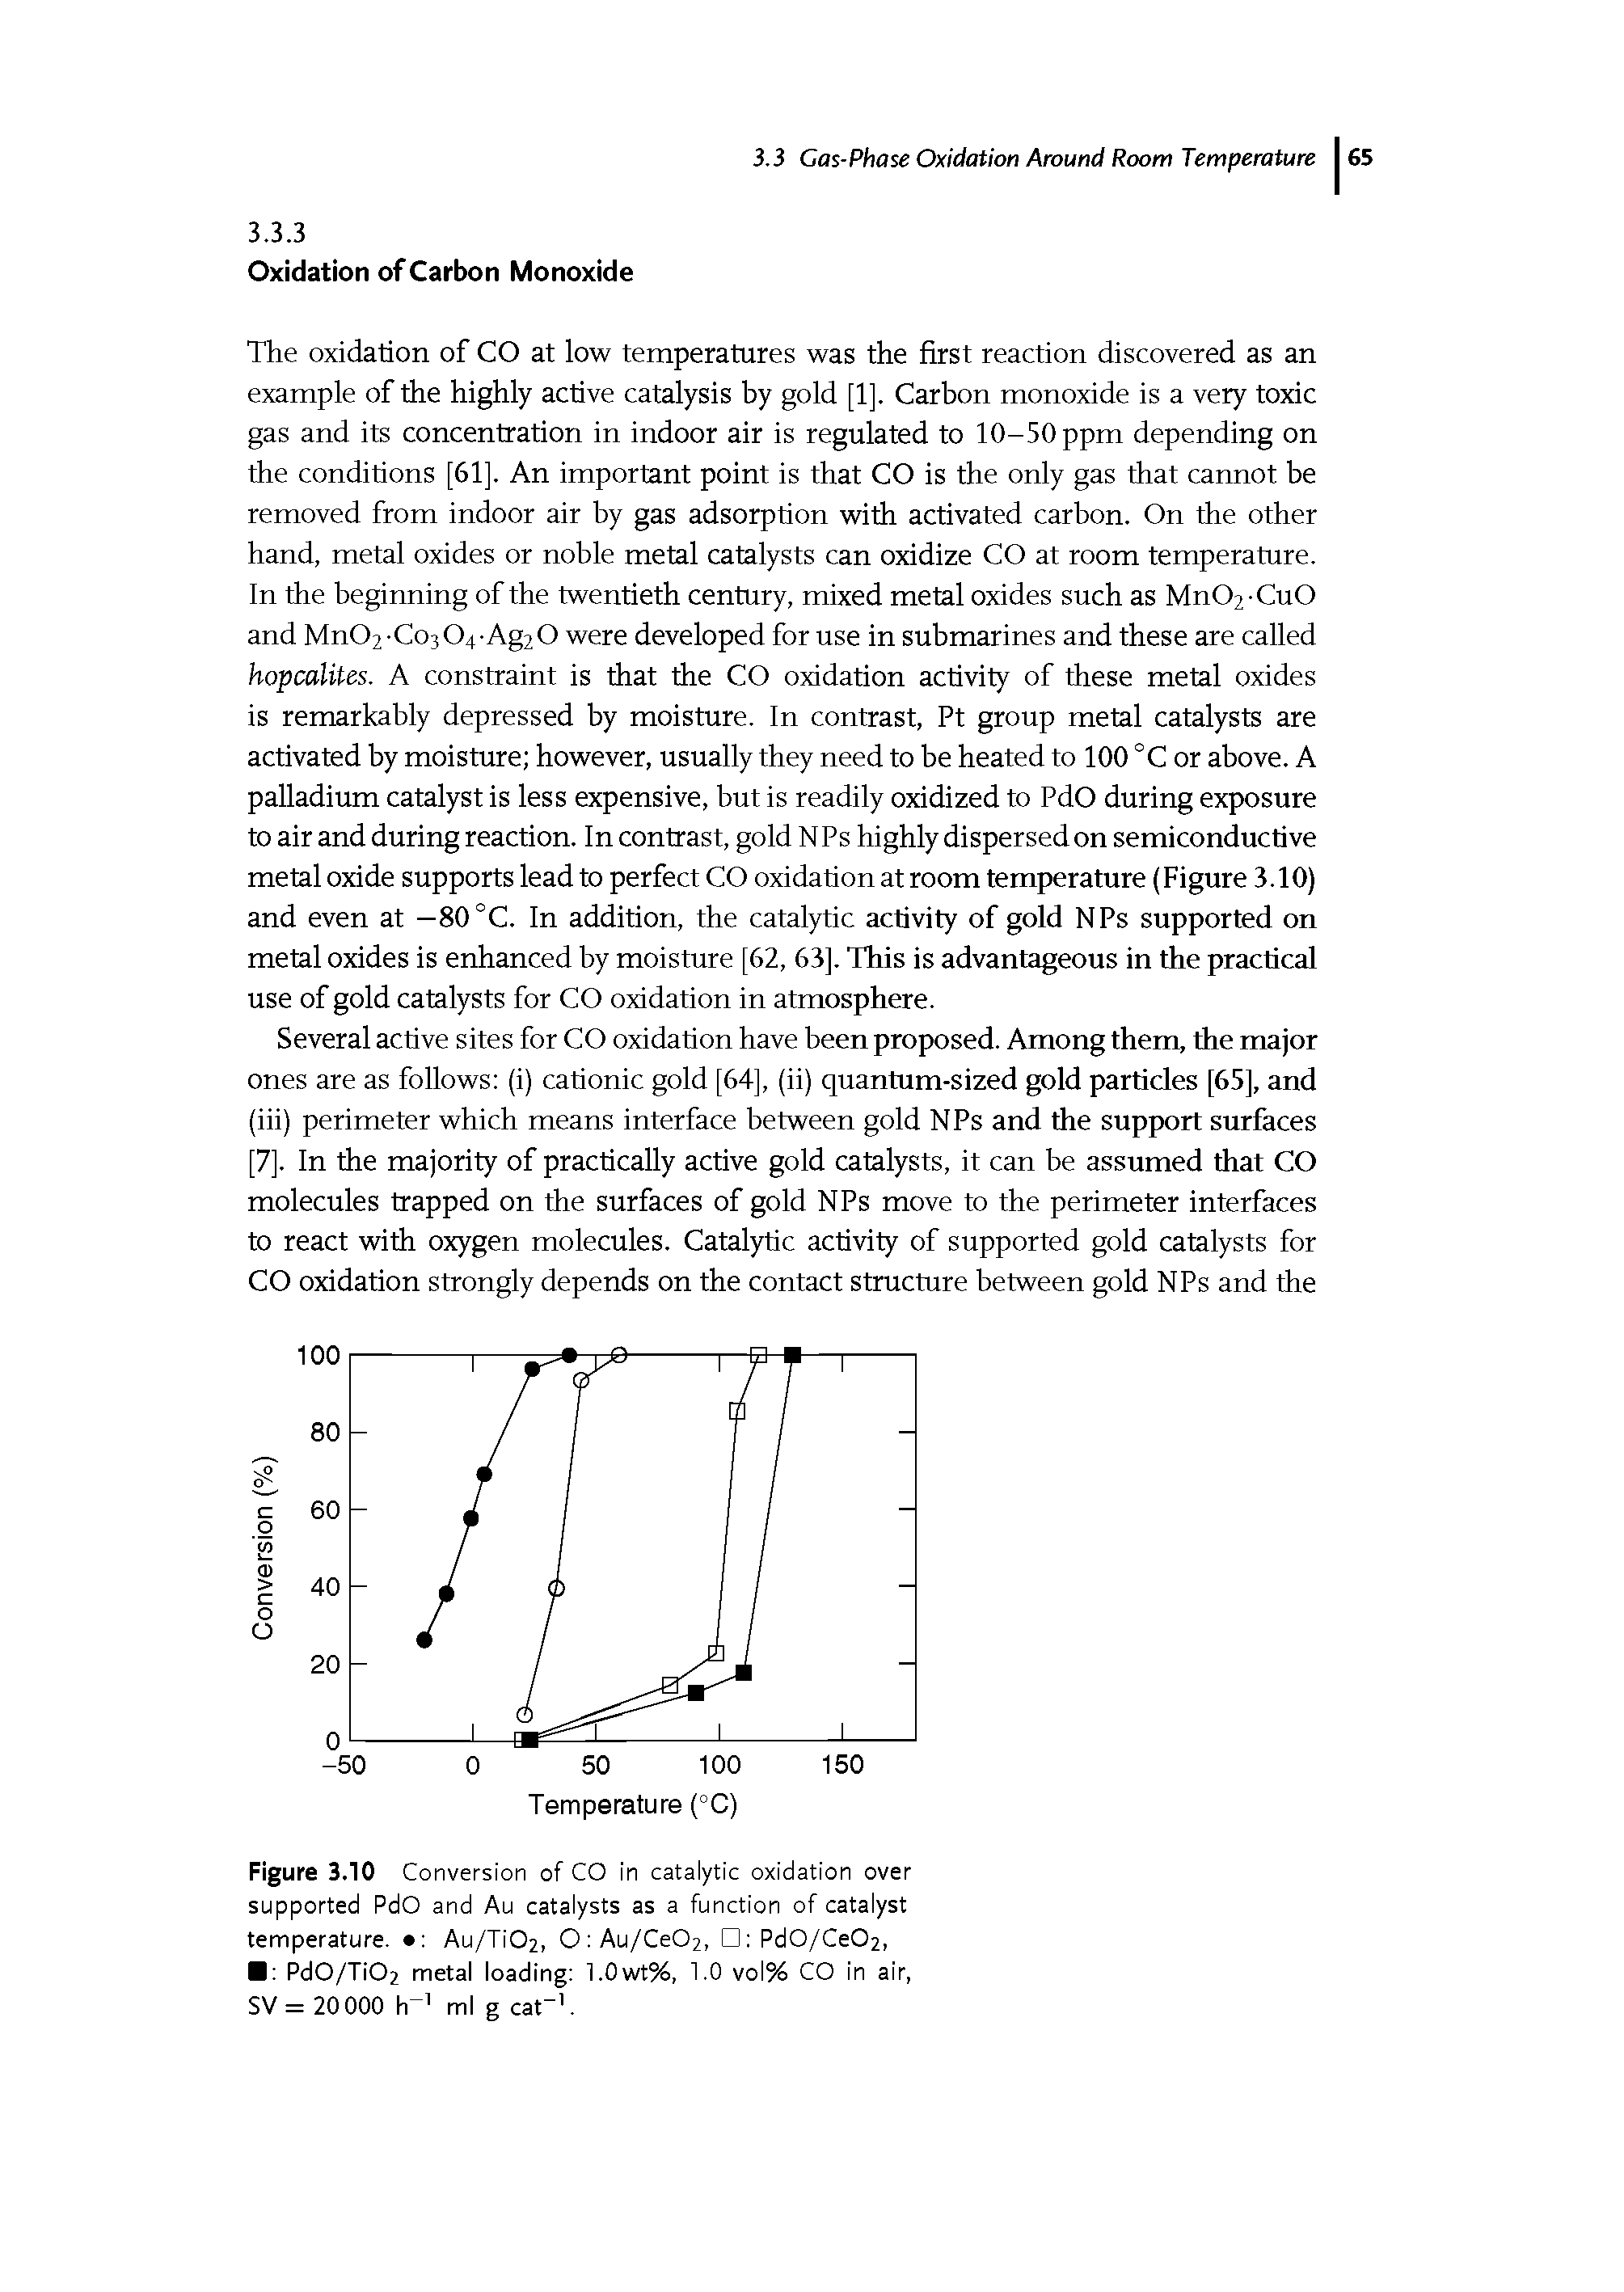 Figure 3.10 Conversion of CO in catalytic oxidation over supported PdO and Au catalysts as a function of catalyst temperature. Au/Ti02, O Au/Ce02, PdO/Ce02,...